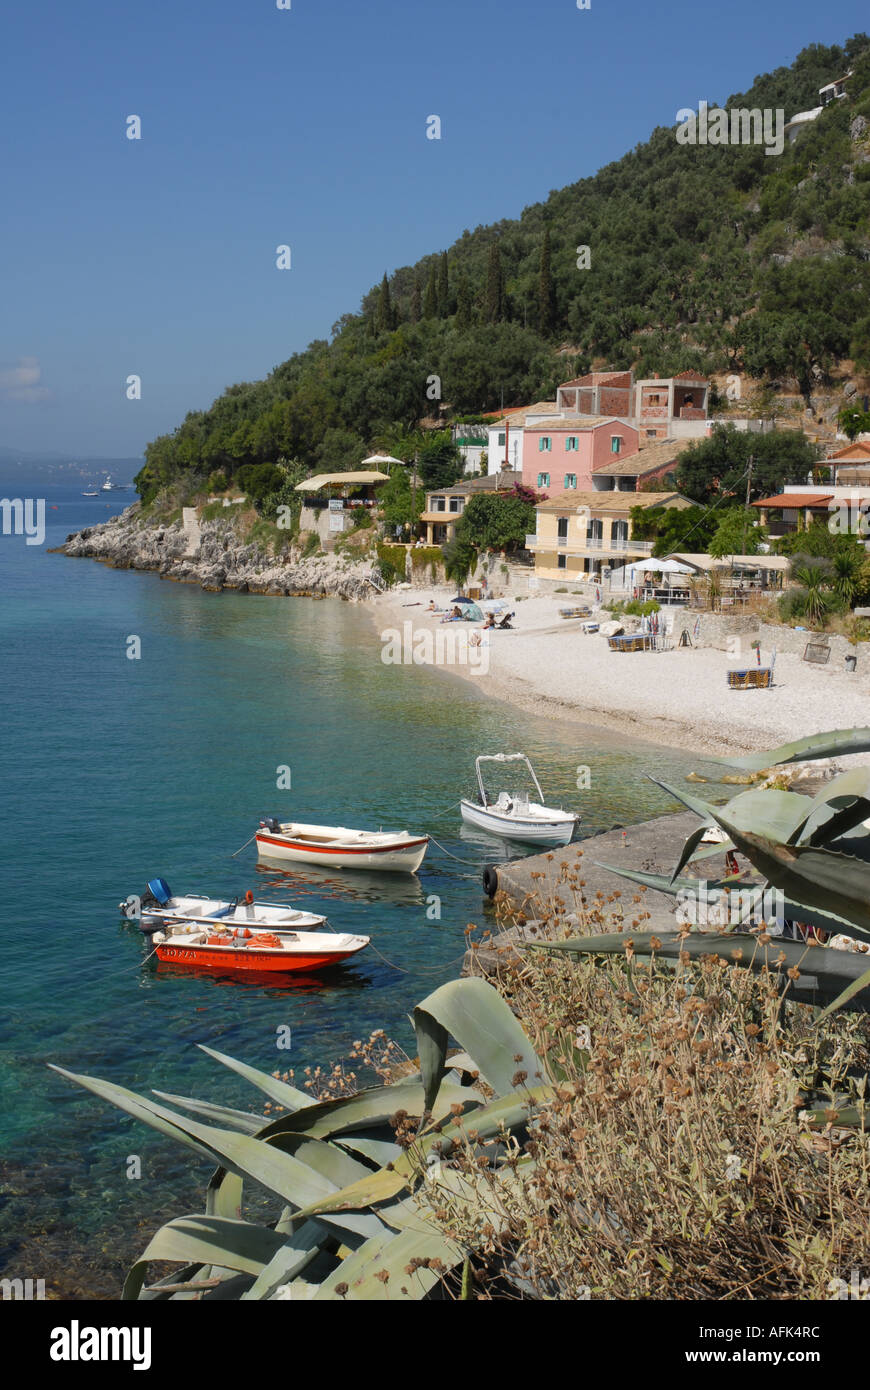 Small beach in Nissaki bay, Corfu, Greece with four hire boats and cacti in foreground, buildings and tavernas beyond Stock Photo